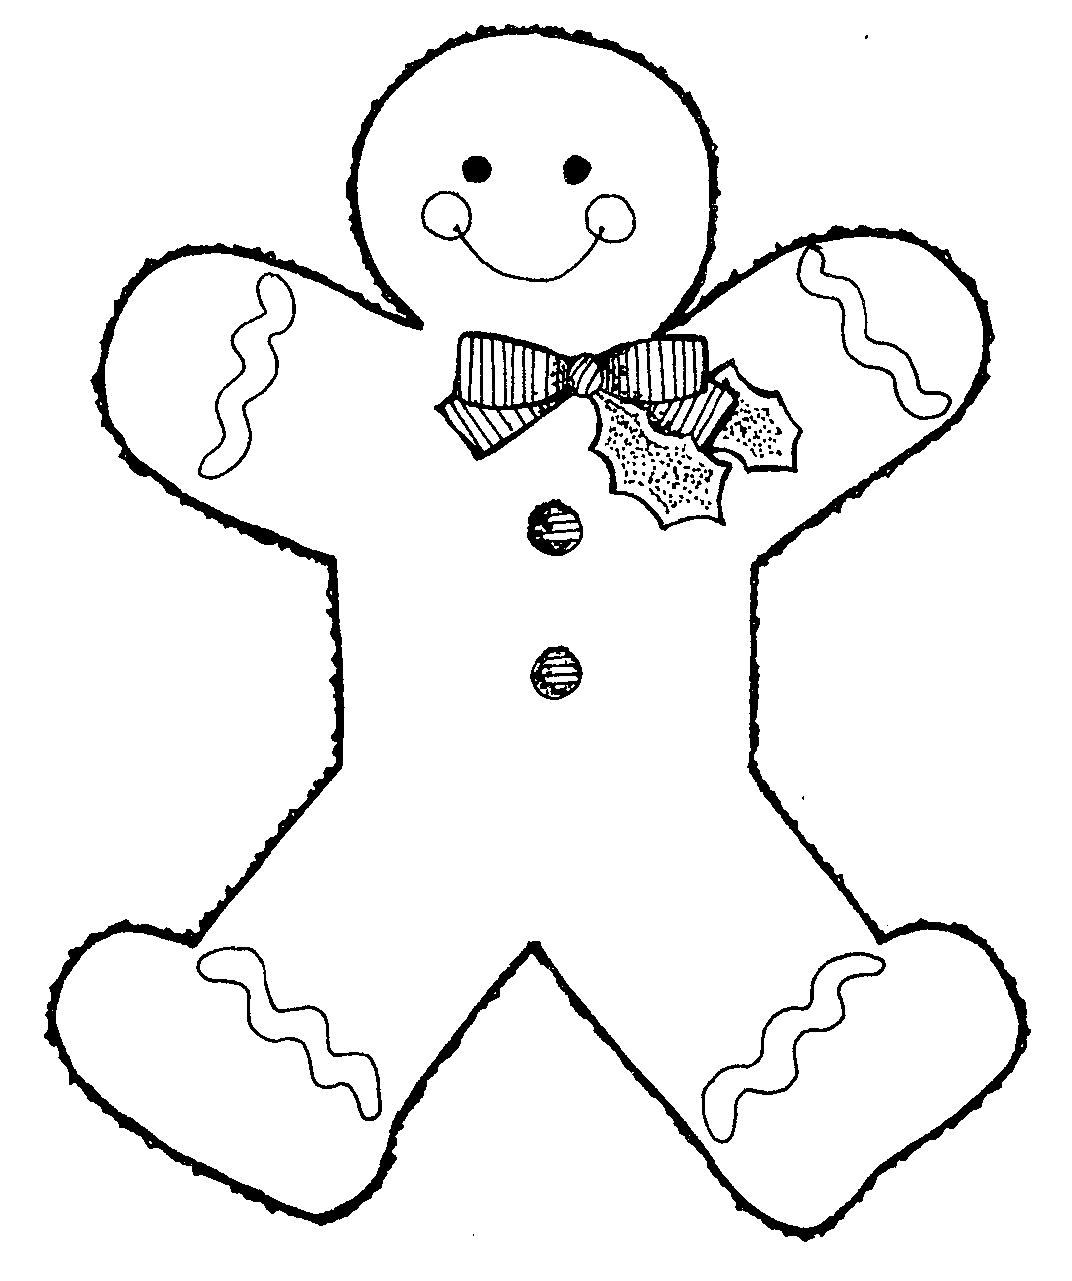 gingerbread man coloring pages | My coloring pages